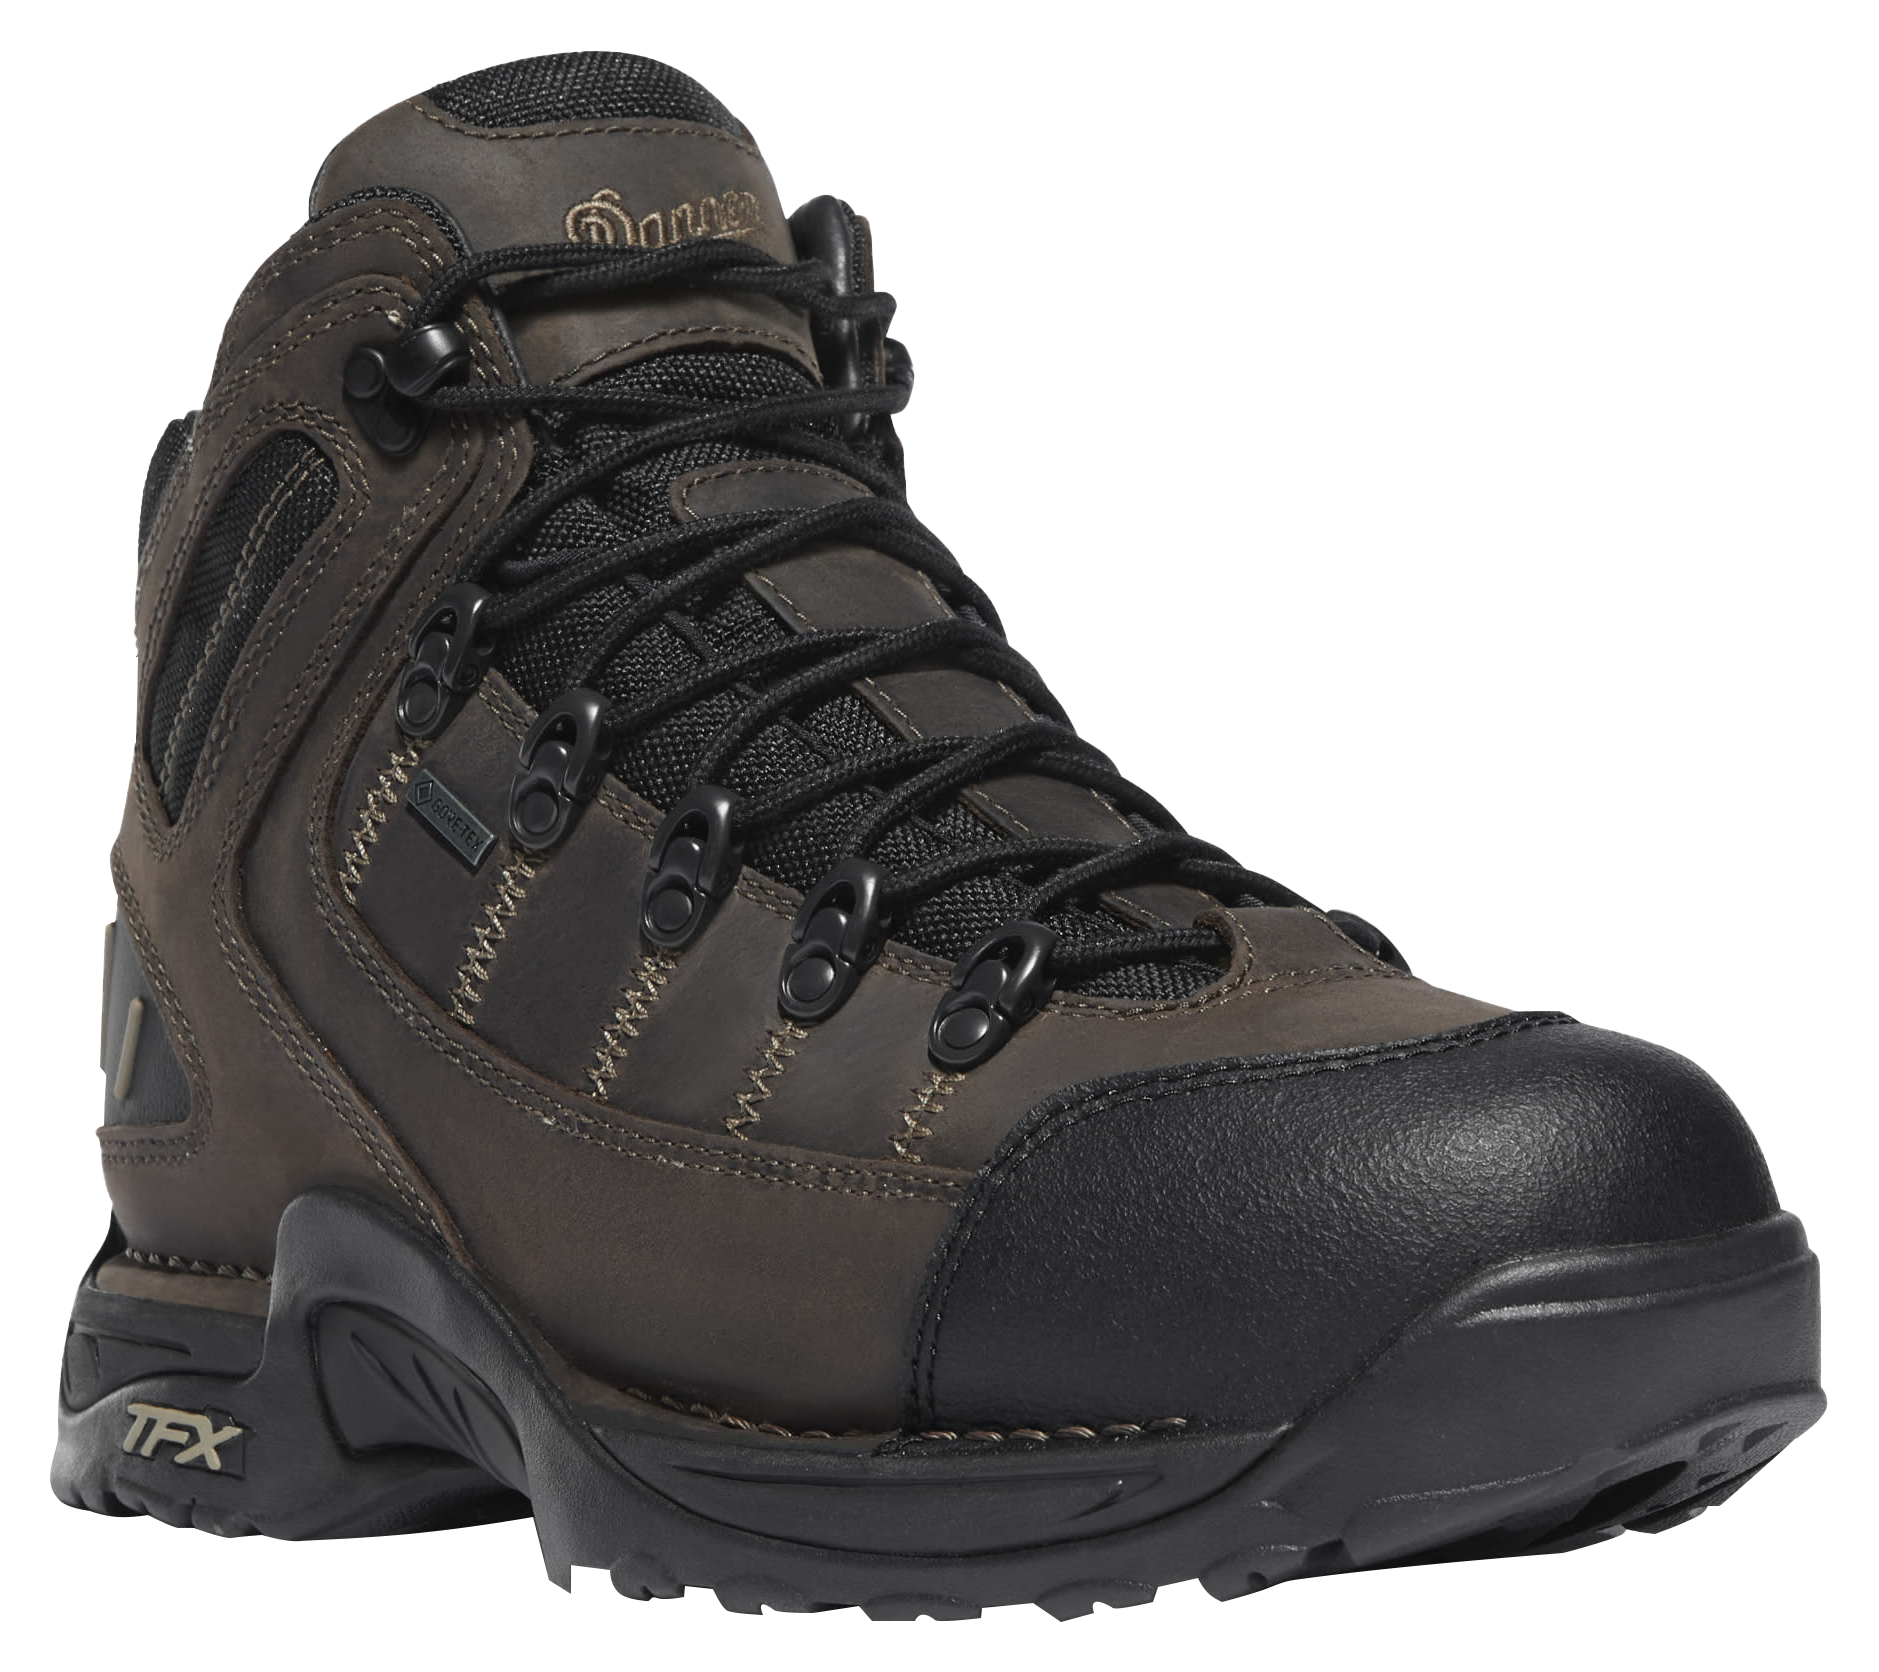 Danner 453 GORE-TEX Waterproof Hiking Boots for Men - Loam Brown/Chocolate Chip - 8.5W